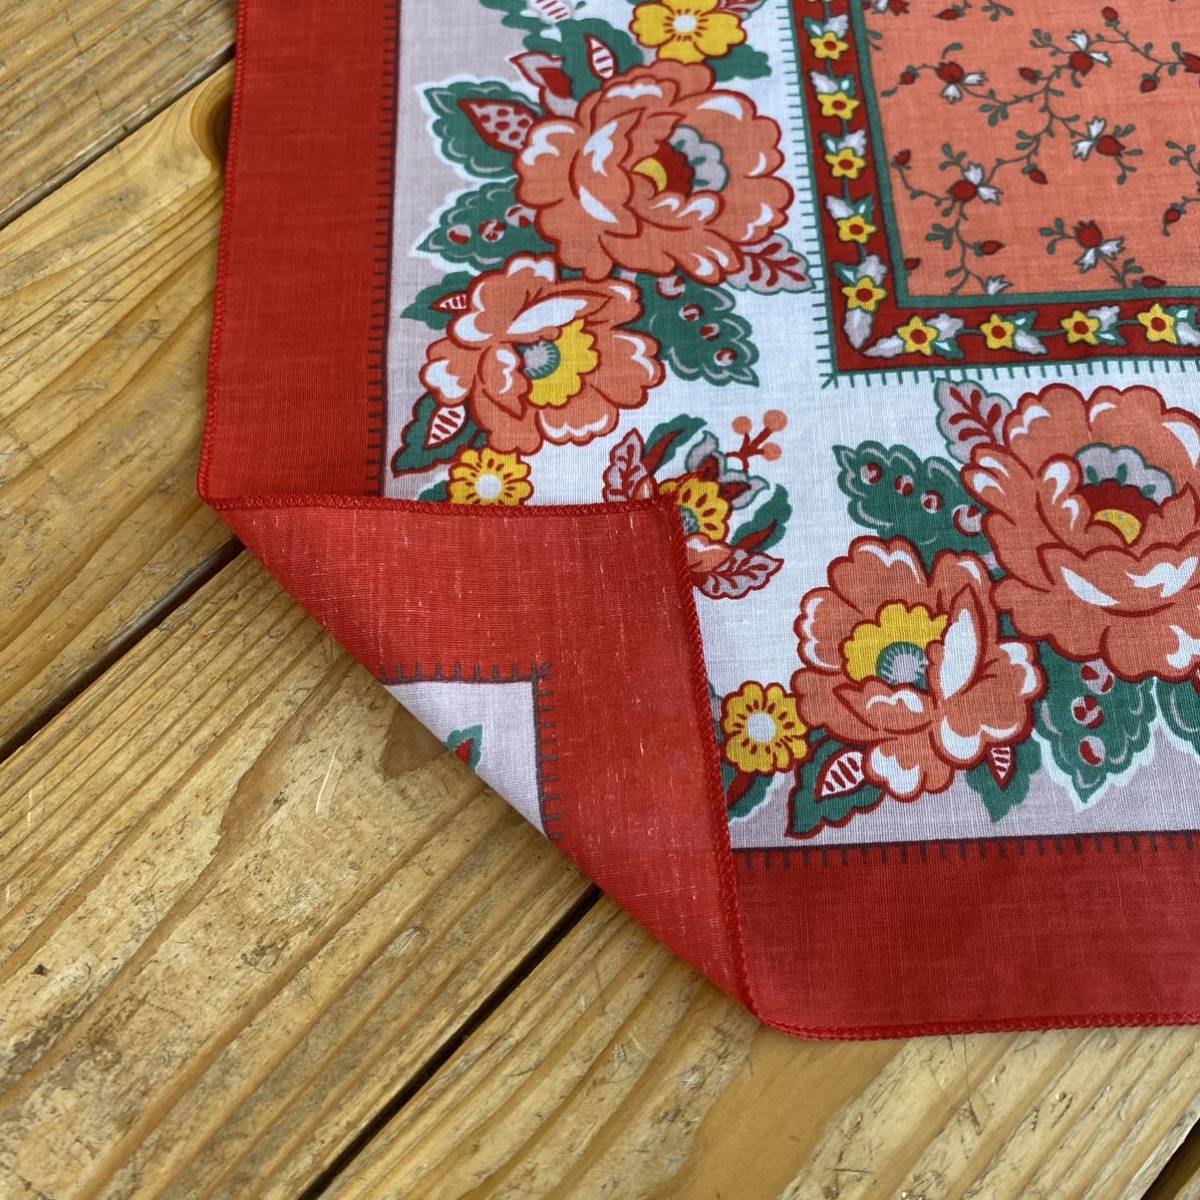  free shipping Vintage beautiful bandana floral print flower beautiful goods red orange Made in USA handkerchie America stock miscellaneous goods old clothes Vintage A0477